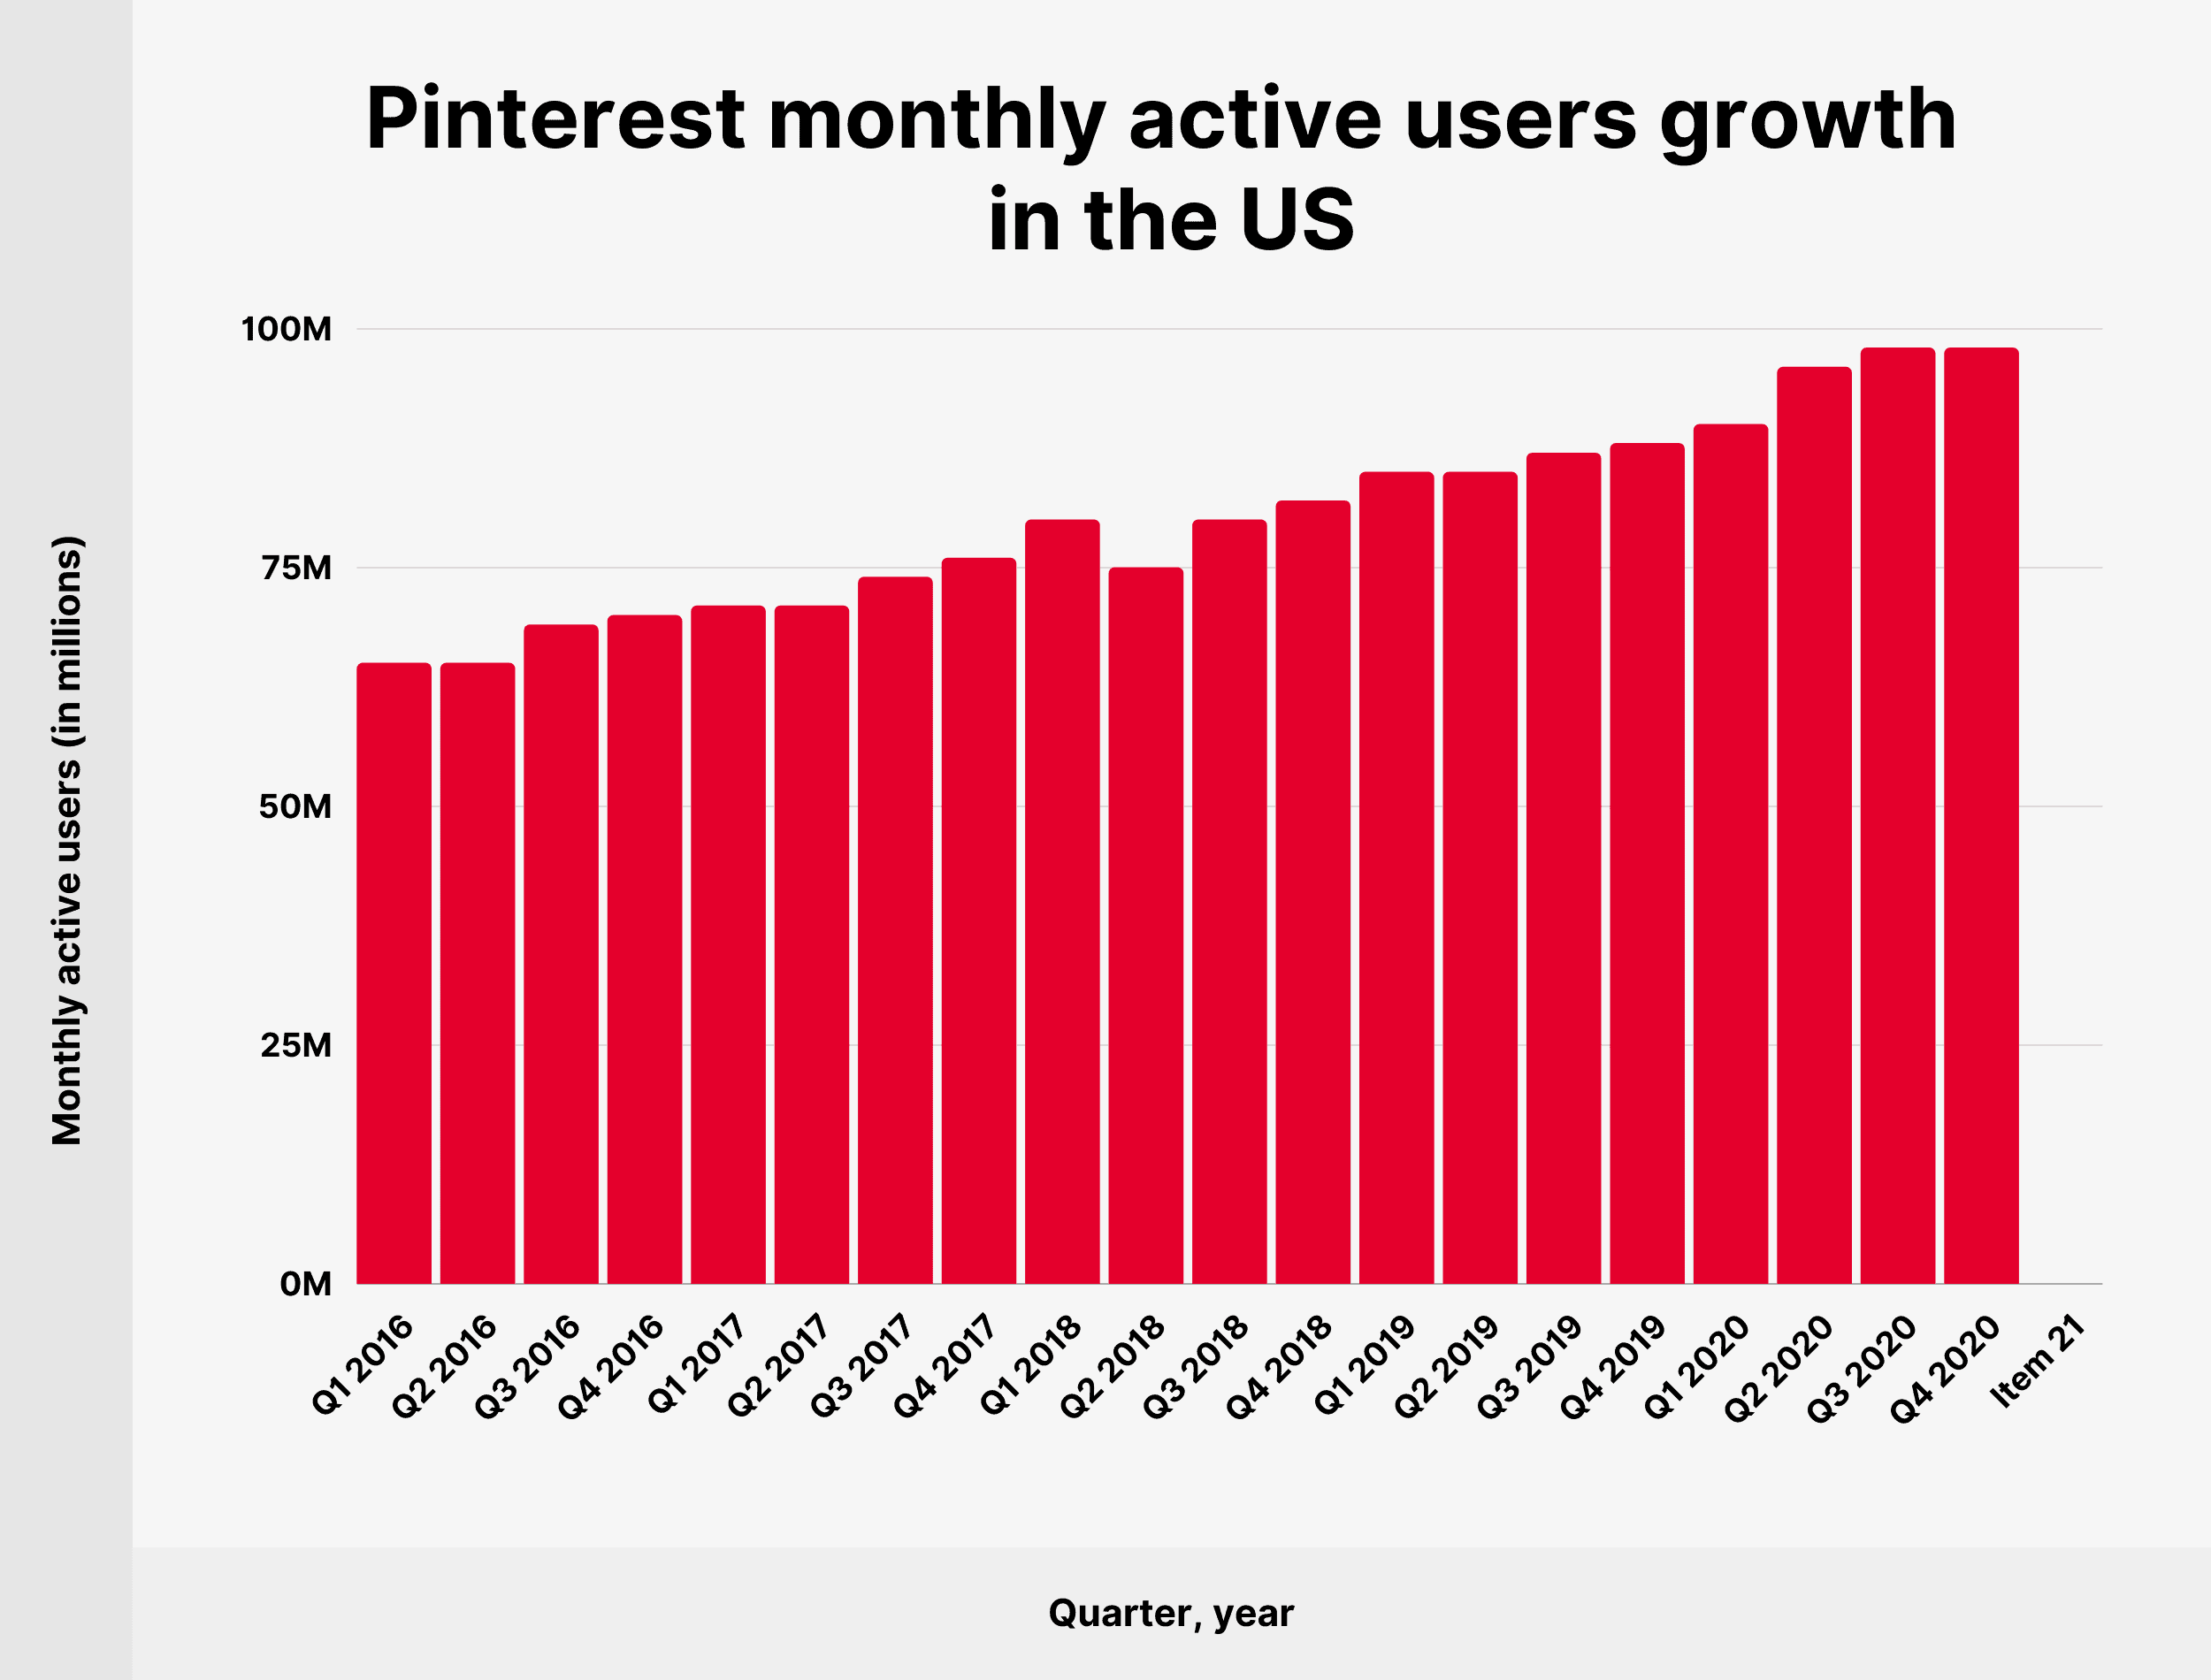 Pinterest monthly active users growth in the US